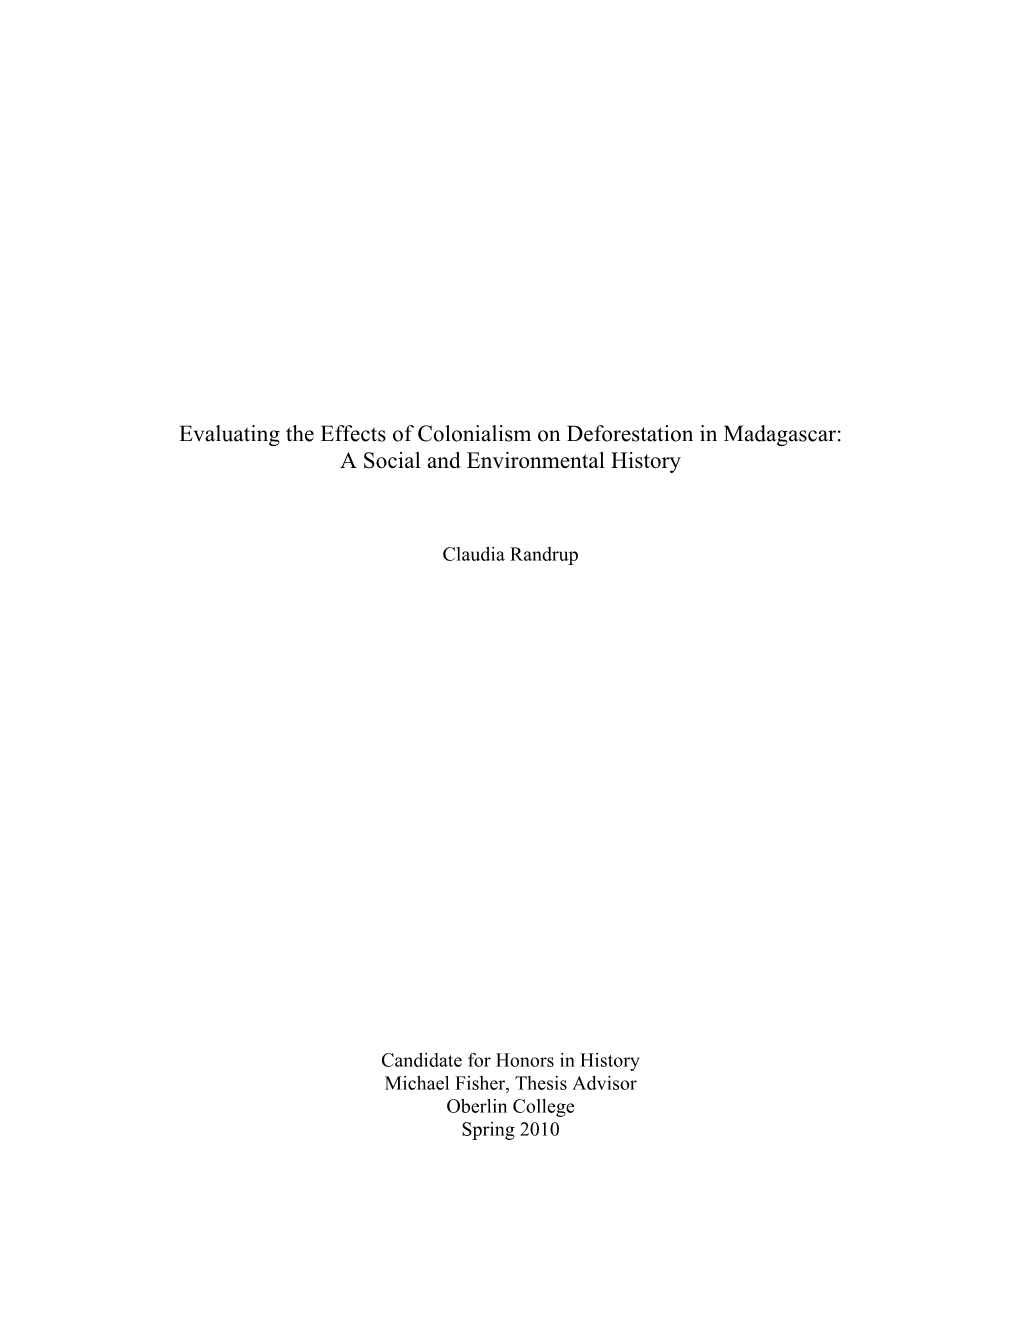 Evaluating the Effects of Colonialism on Deforestation in Madagascar: a Social and Environmental History